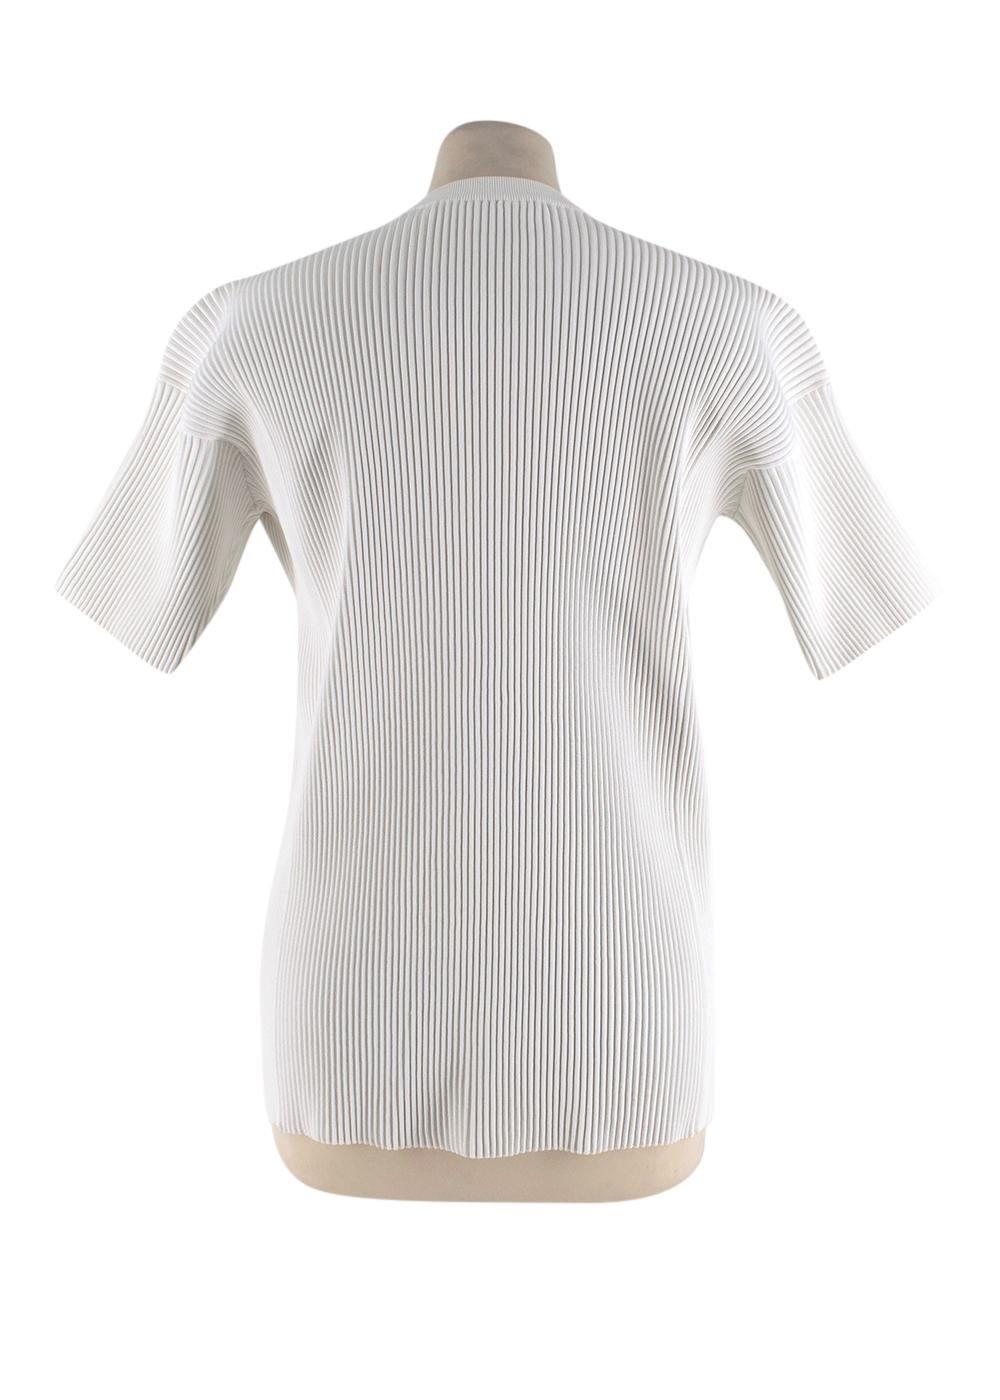 Victoria Beckham White Ribbed Top

- Ribbed stretchy texture 
- Short sleeves
- Mid weight material
- Round neck with extra ribbing
- Exposed edges
- Spring Summer 2015
- Straight cut

Fabric Composition:

78% Viscose
16% polyester
5% Polyamide
1%